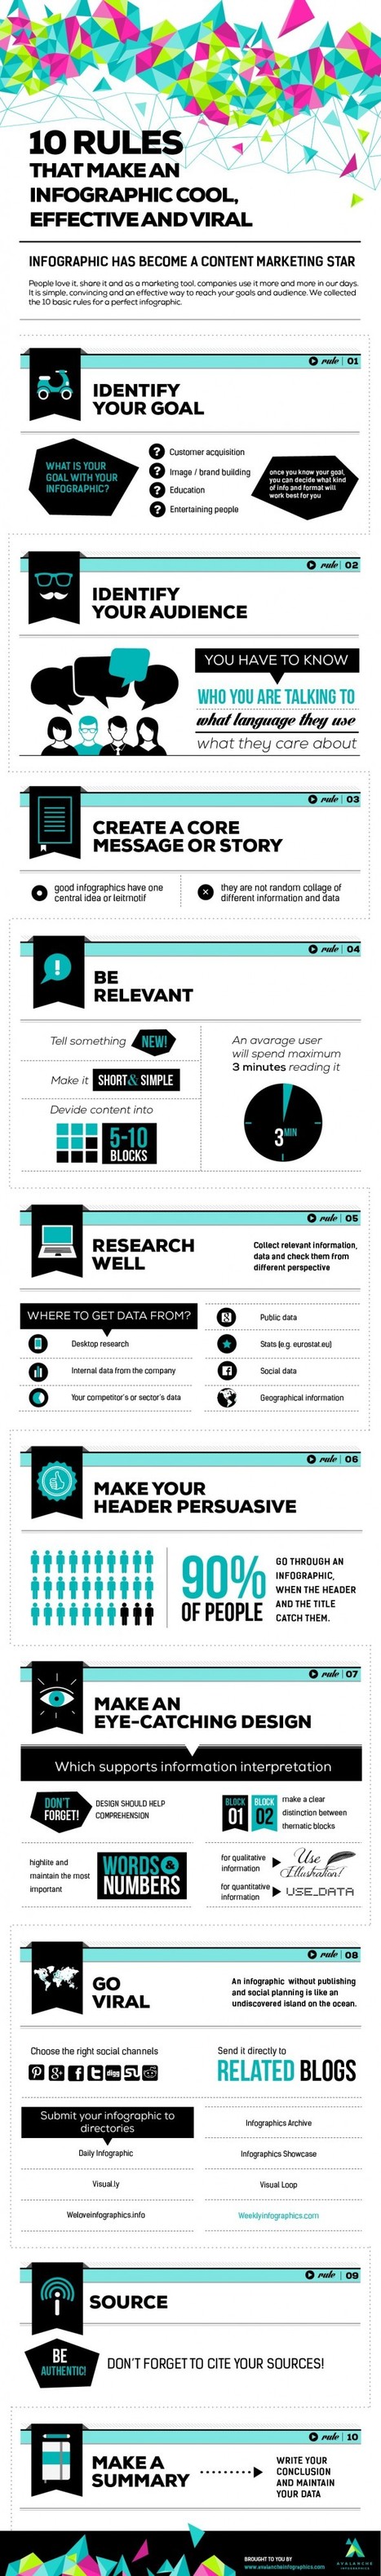 10 Rules To Make An Infographic Viral [INFOGRAPHIC] | Time to Learn | Scoop.it